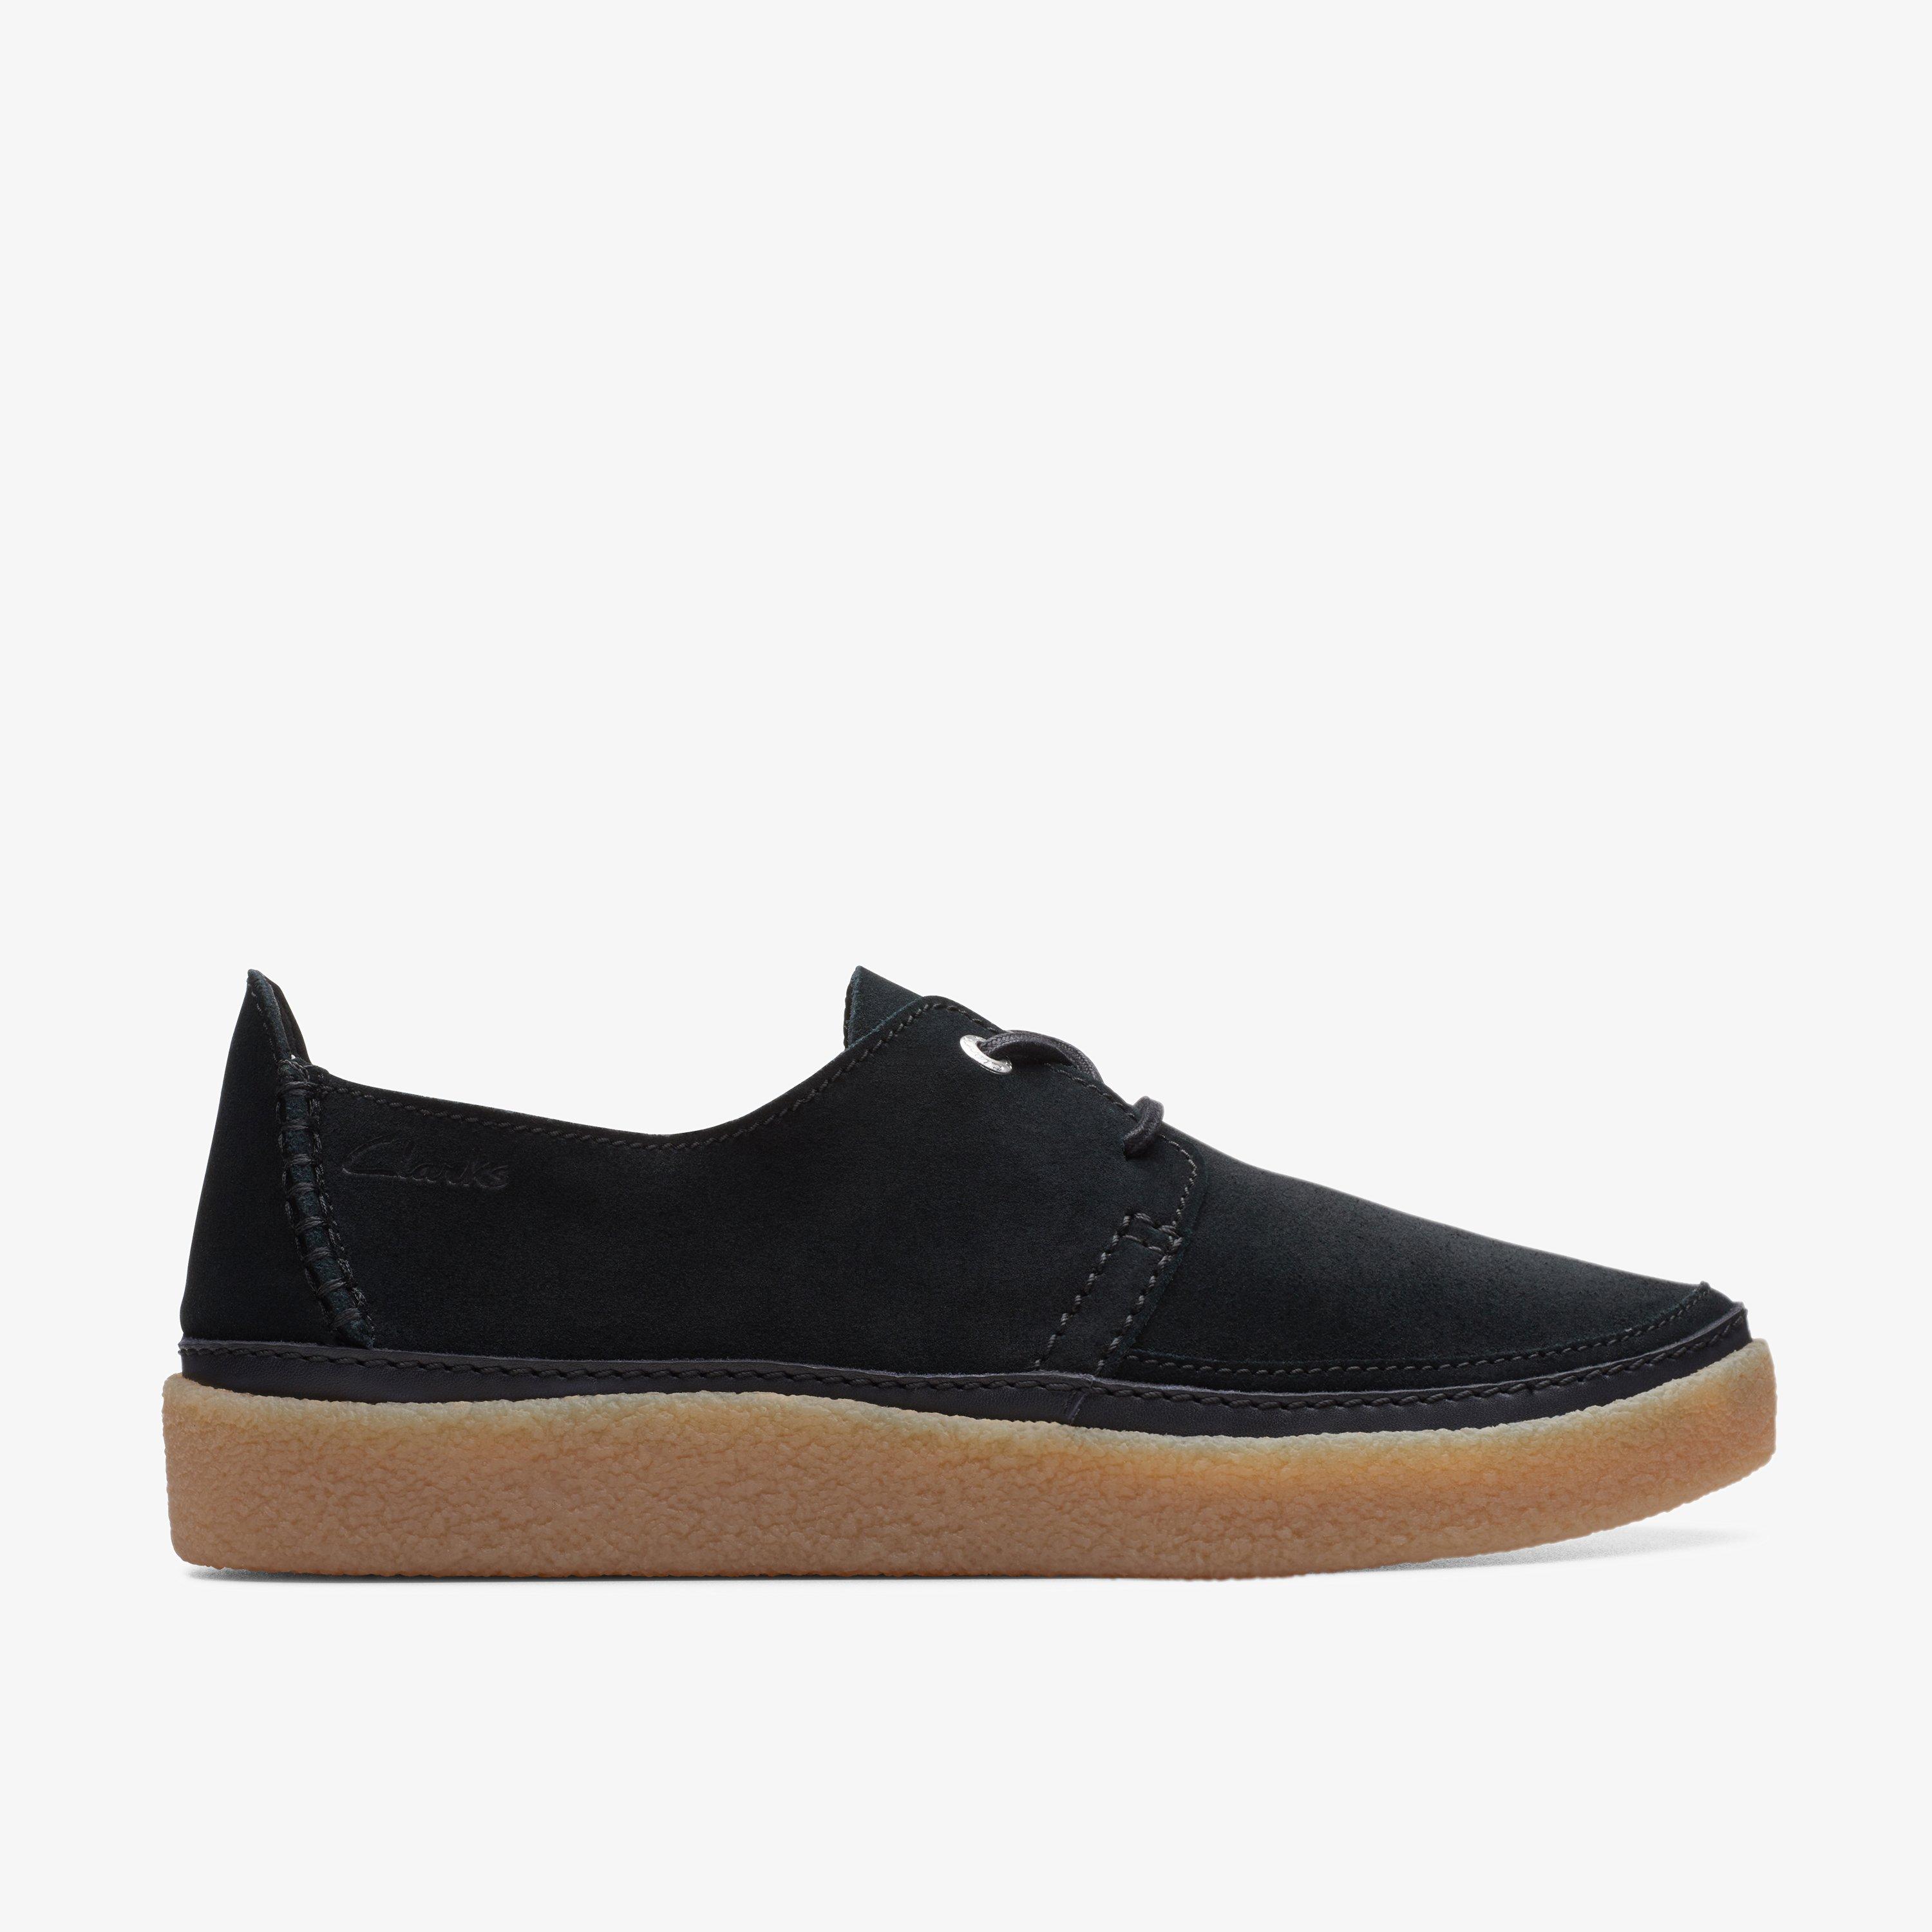 Reload Suede 2 suede sneakers with laces